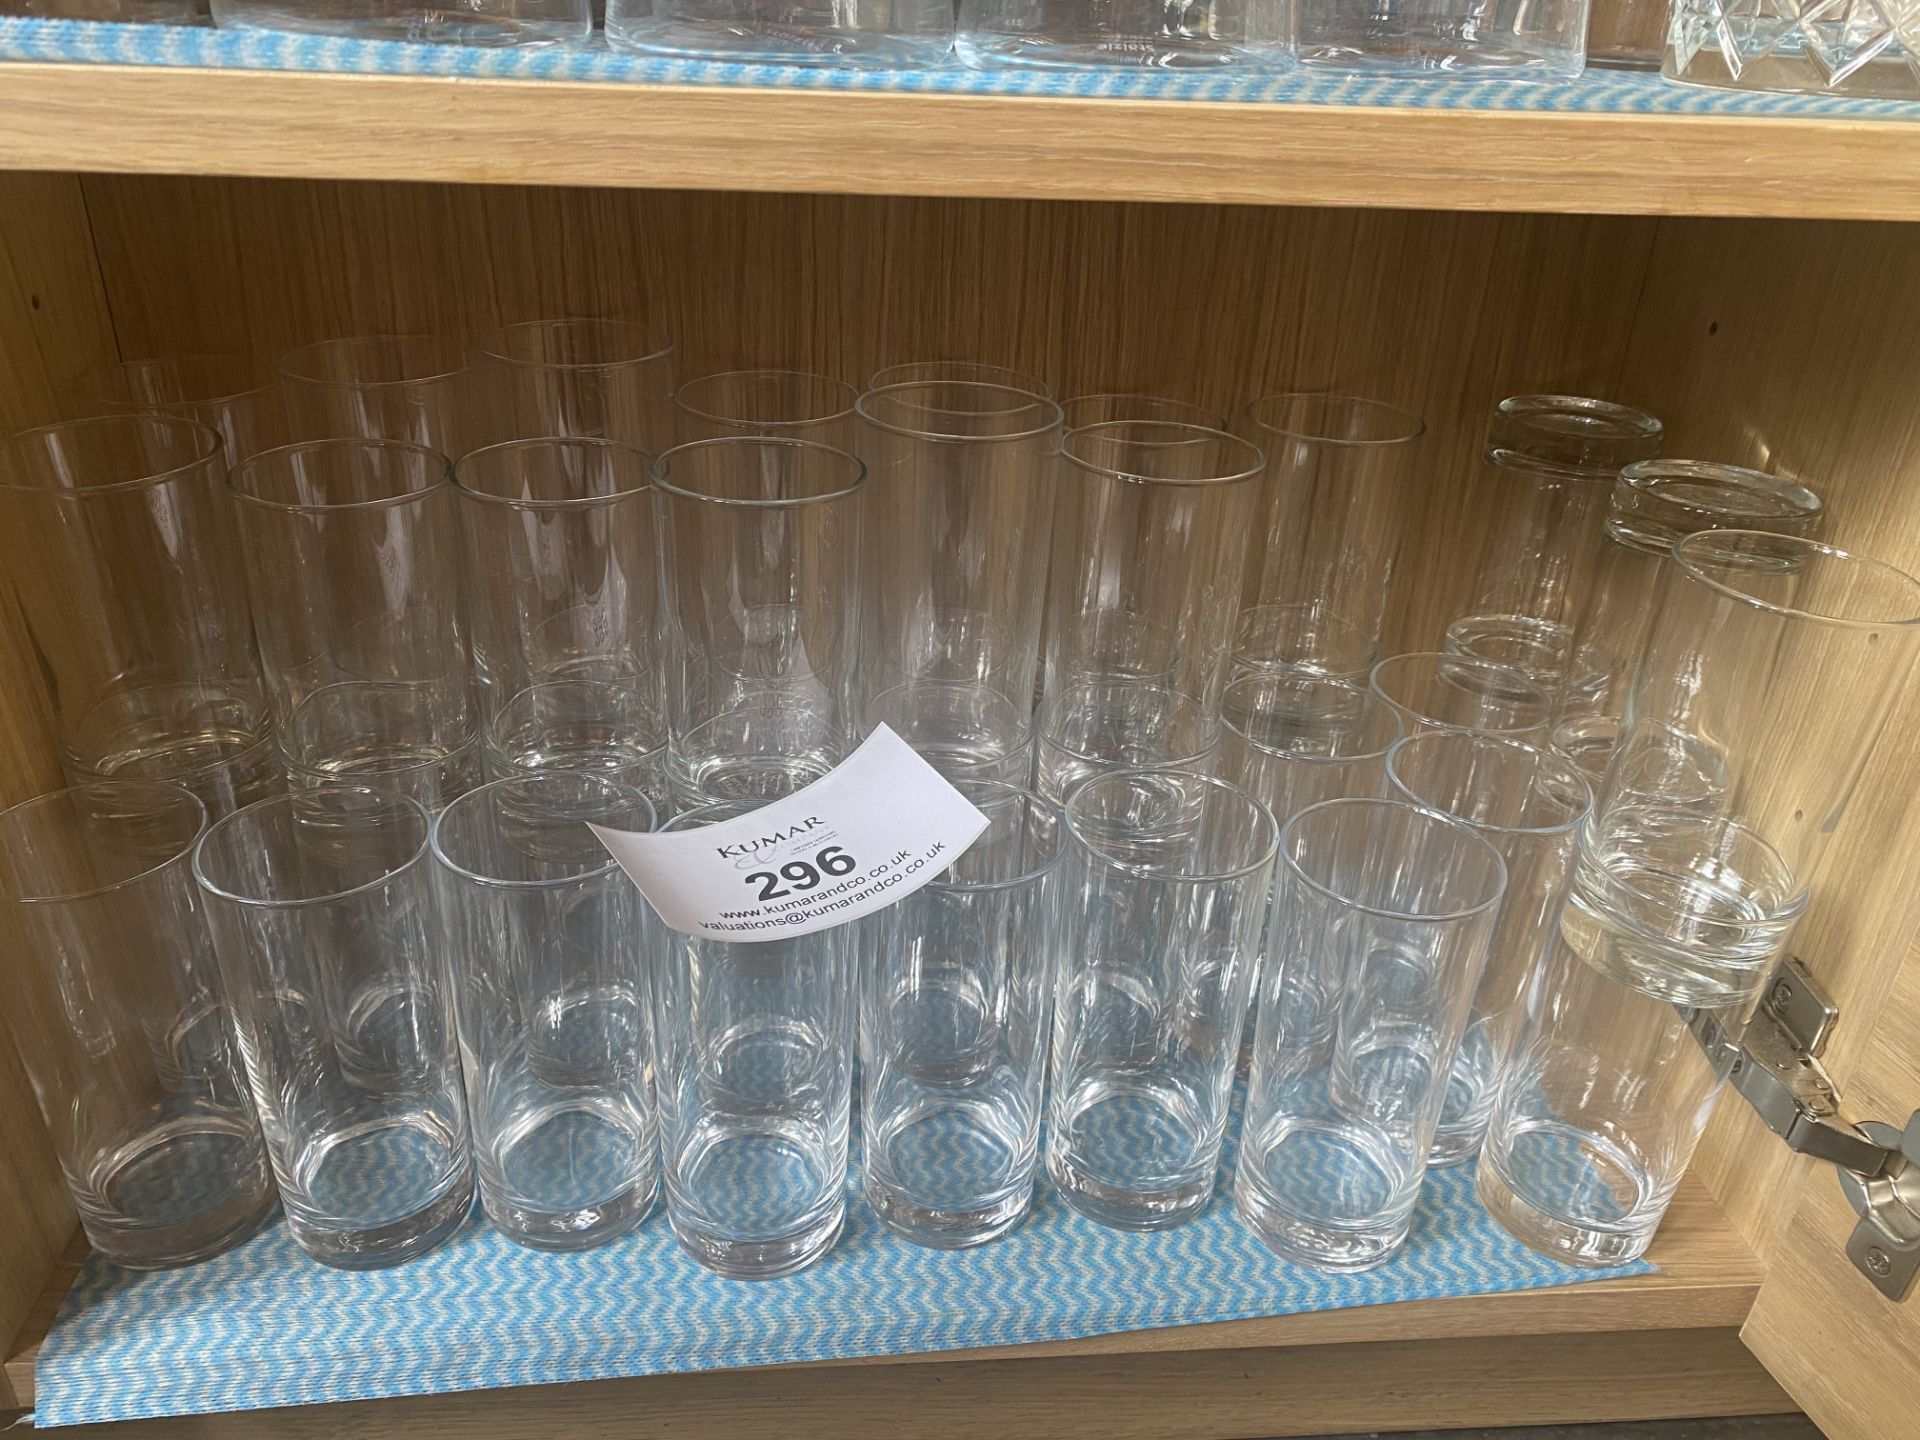 42x Tall Drinking Glasses. Please Note - This lot is located at Hengata Restaurant, 106 High Street,